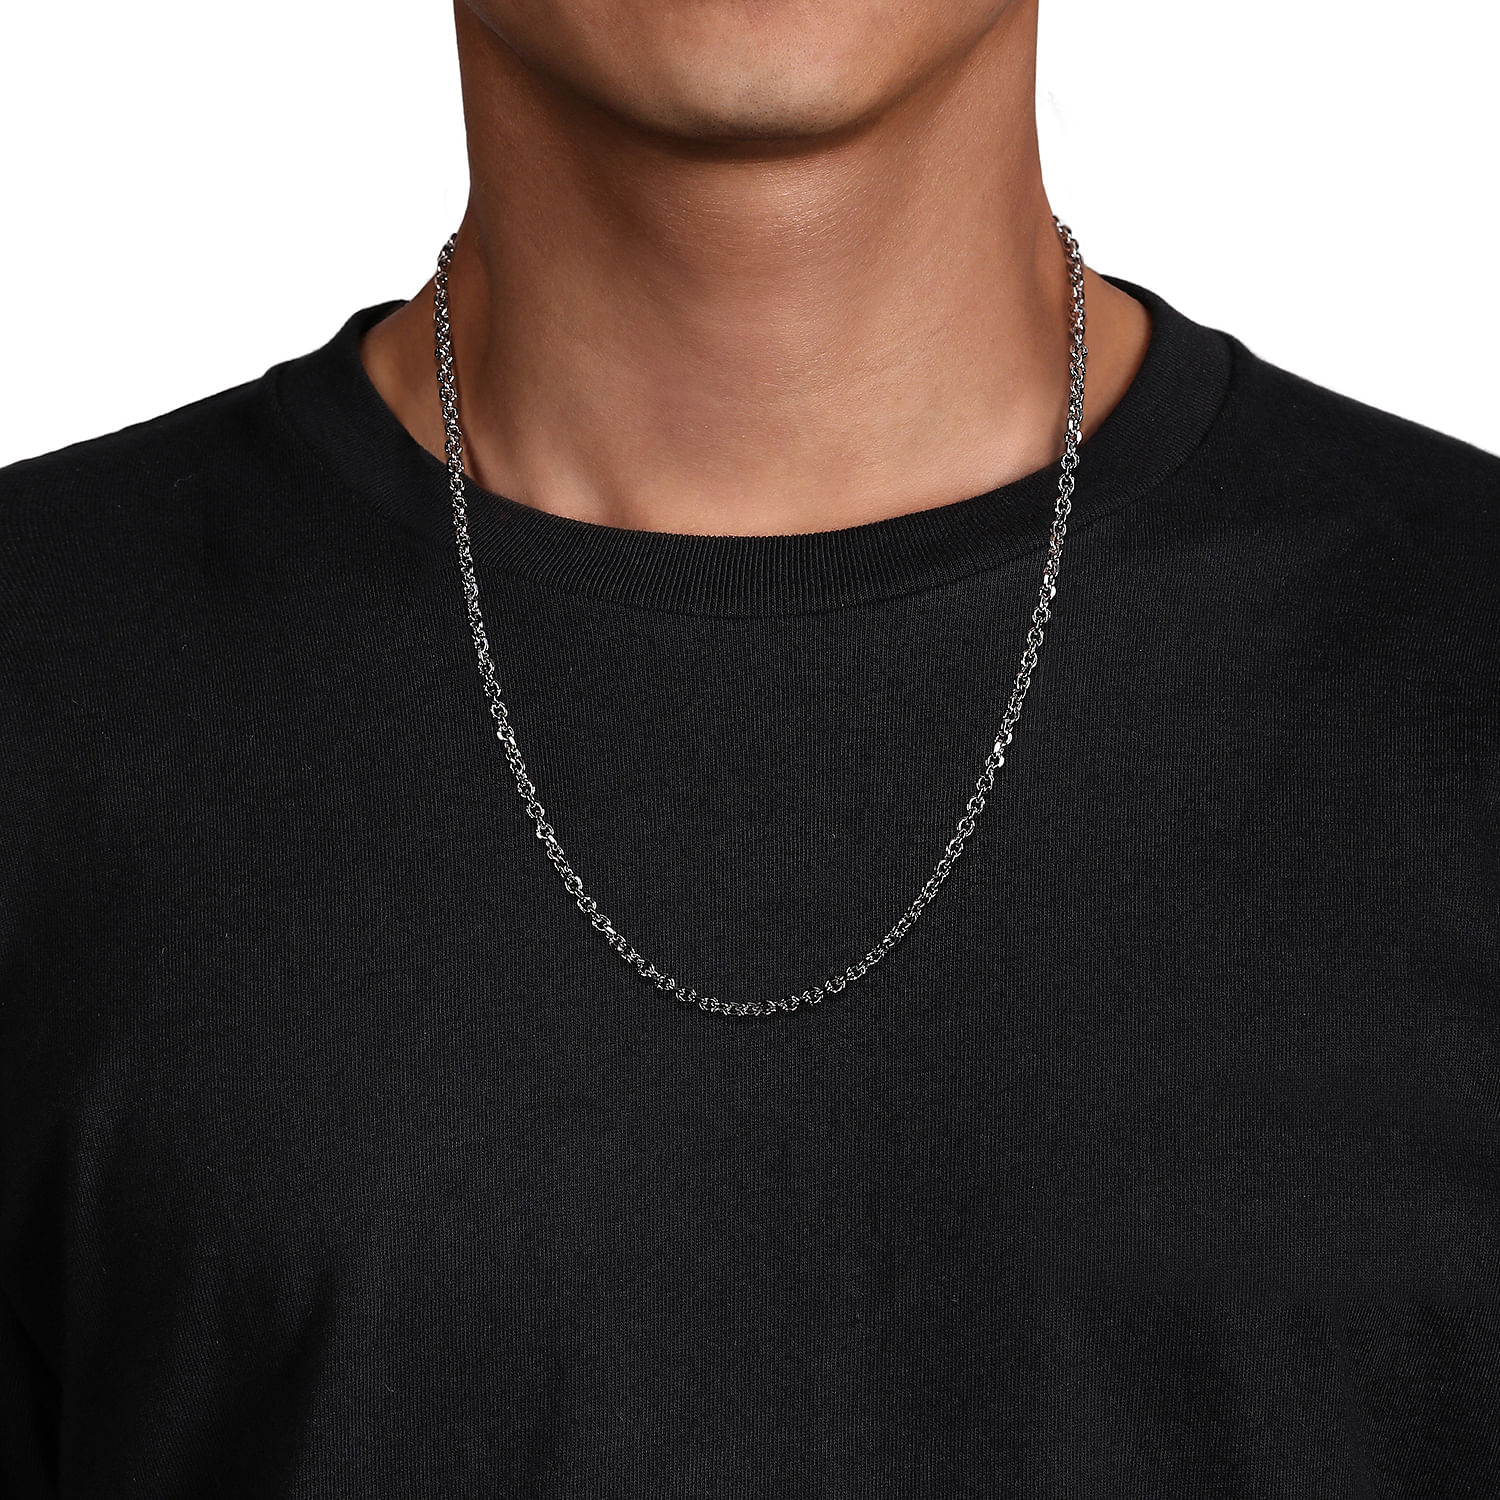 24 Inch 14K White Gold Men's Link Chain Necklace